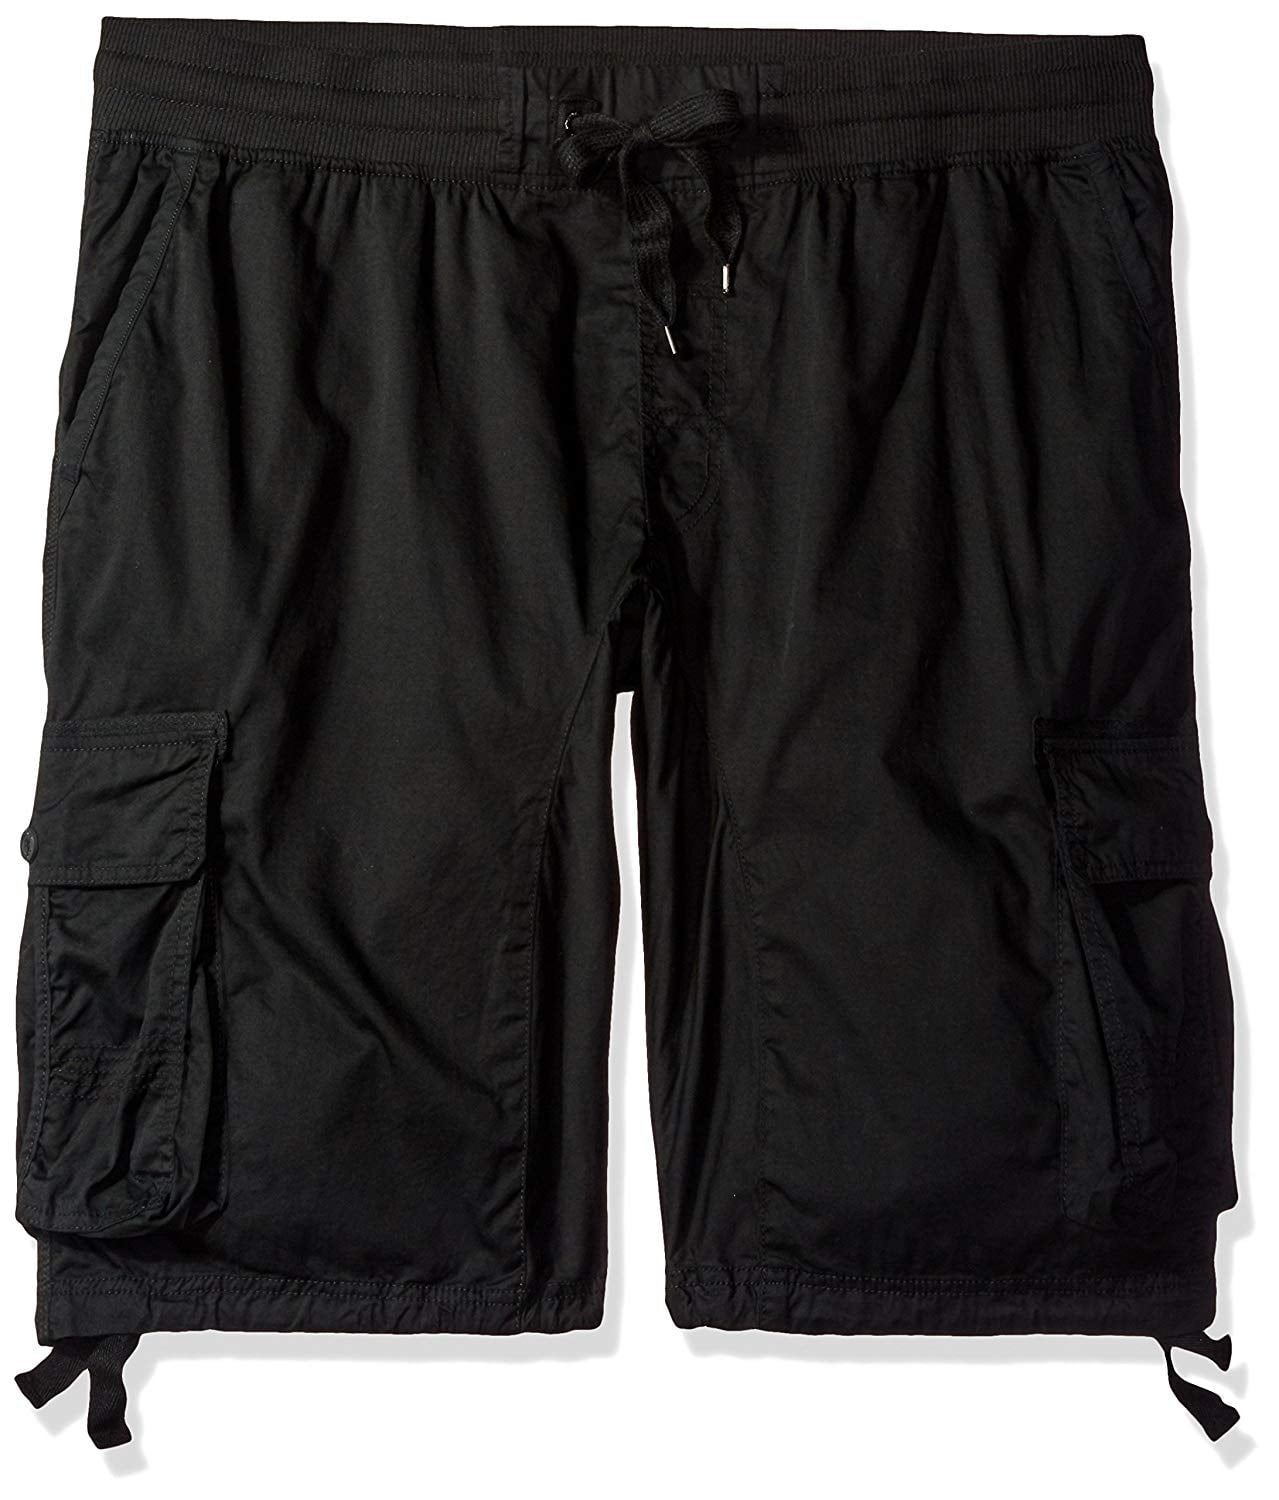 Southpole Mens Big and Tall Big & Tall Belted Cargo Shorts with Cell Phone Pocket 